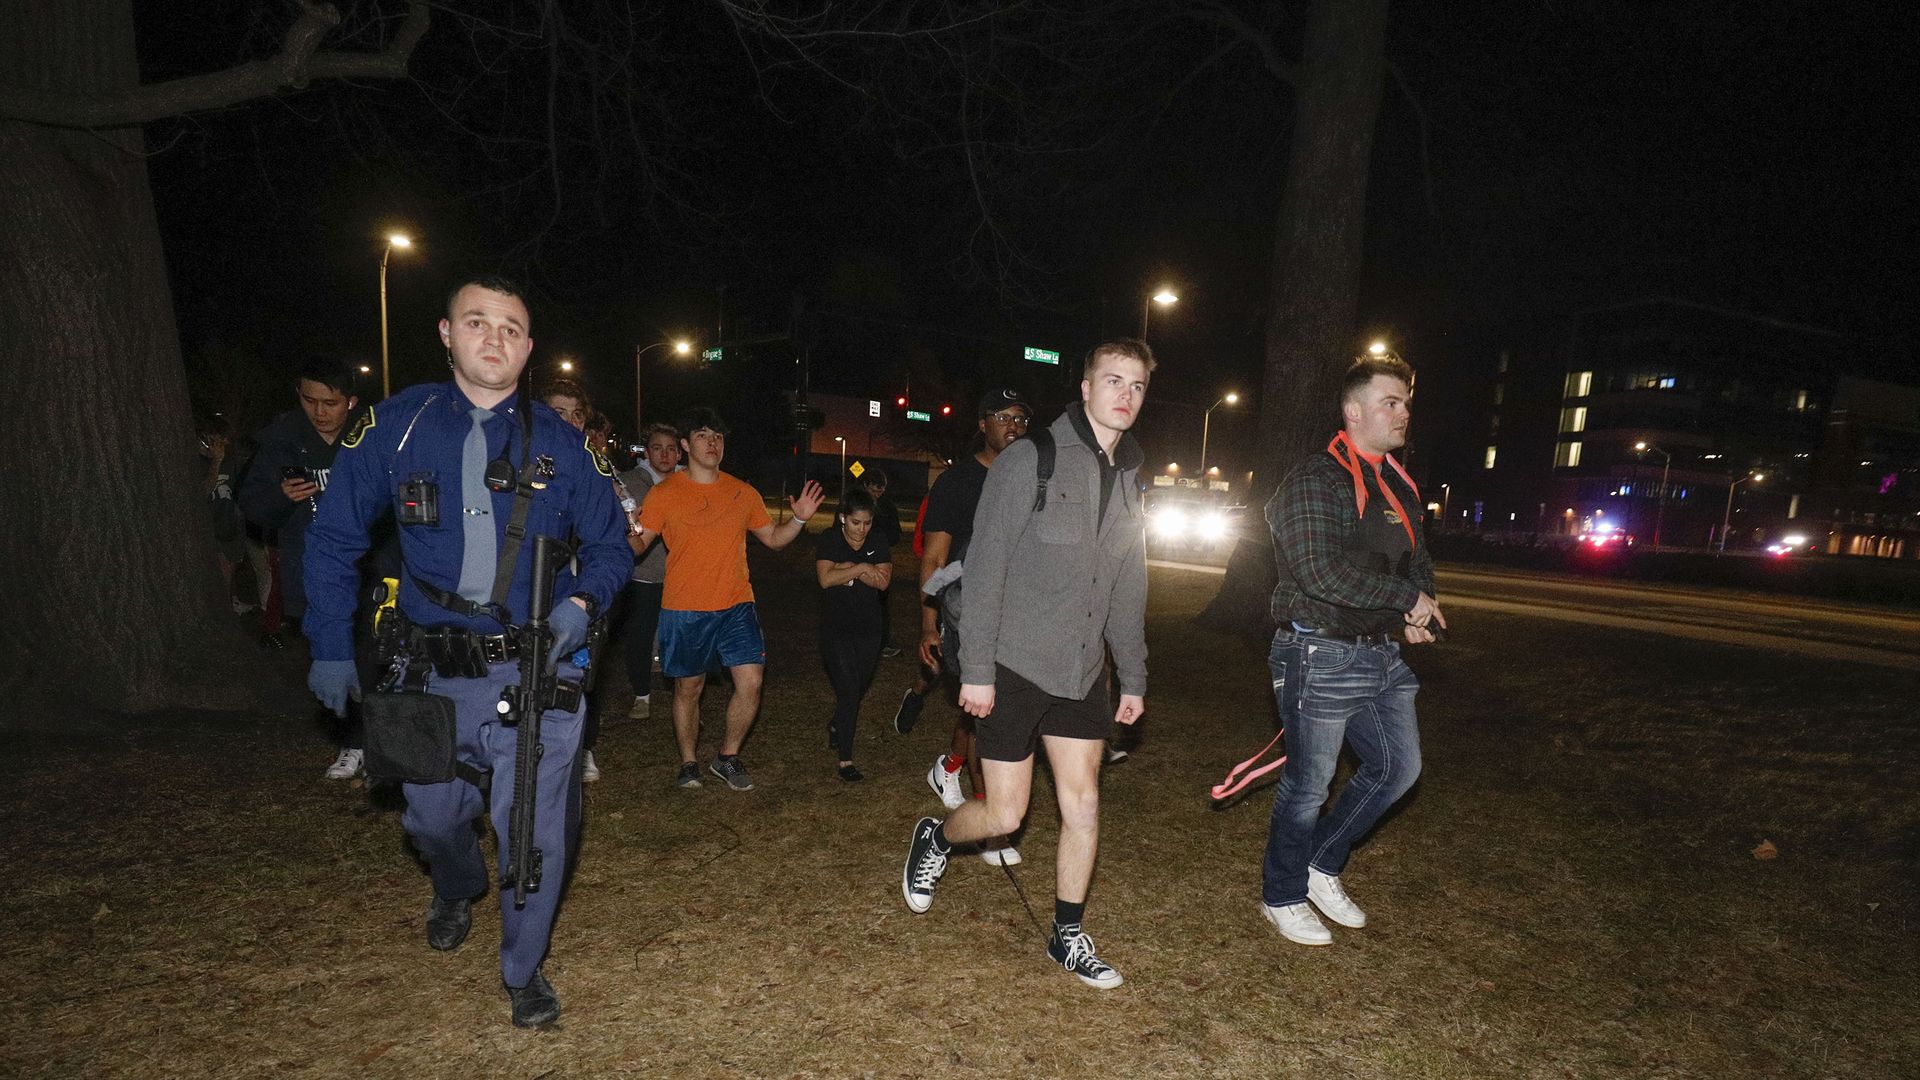 Michigan State University students are led to a safe area during an active shooter situation on campus on February 13, 2023 in Lansing, Michigan.